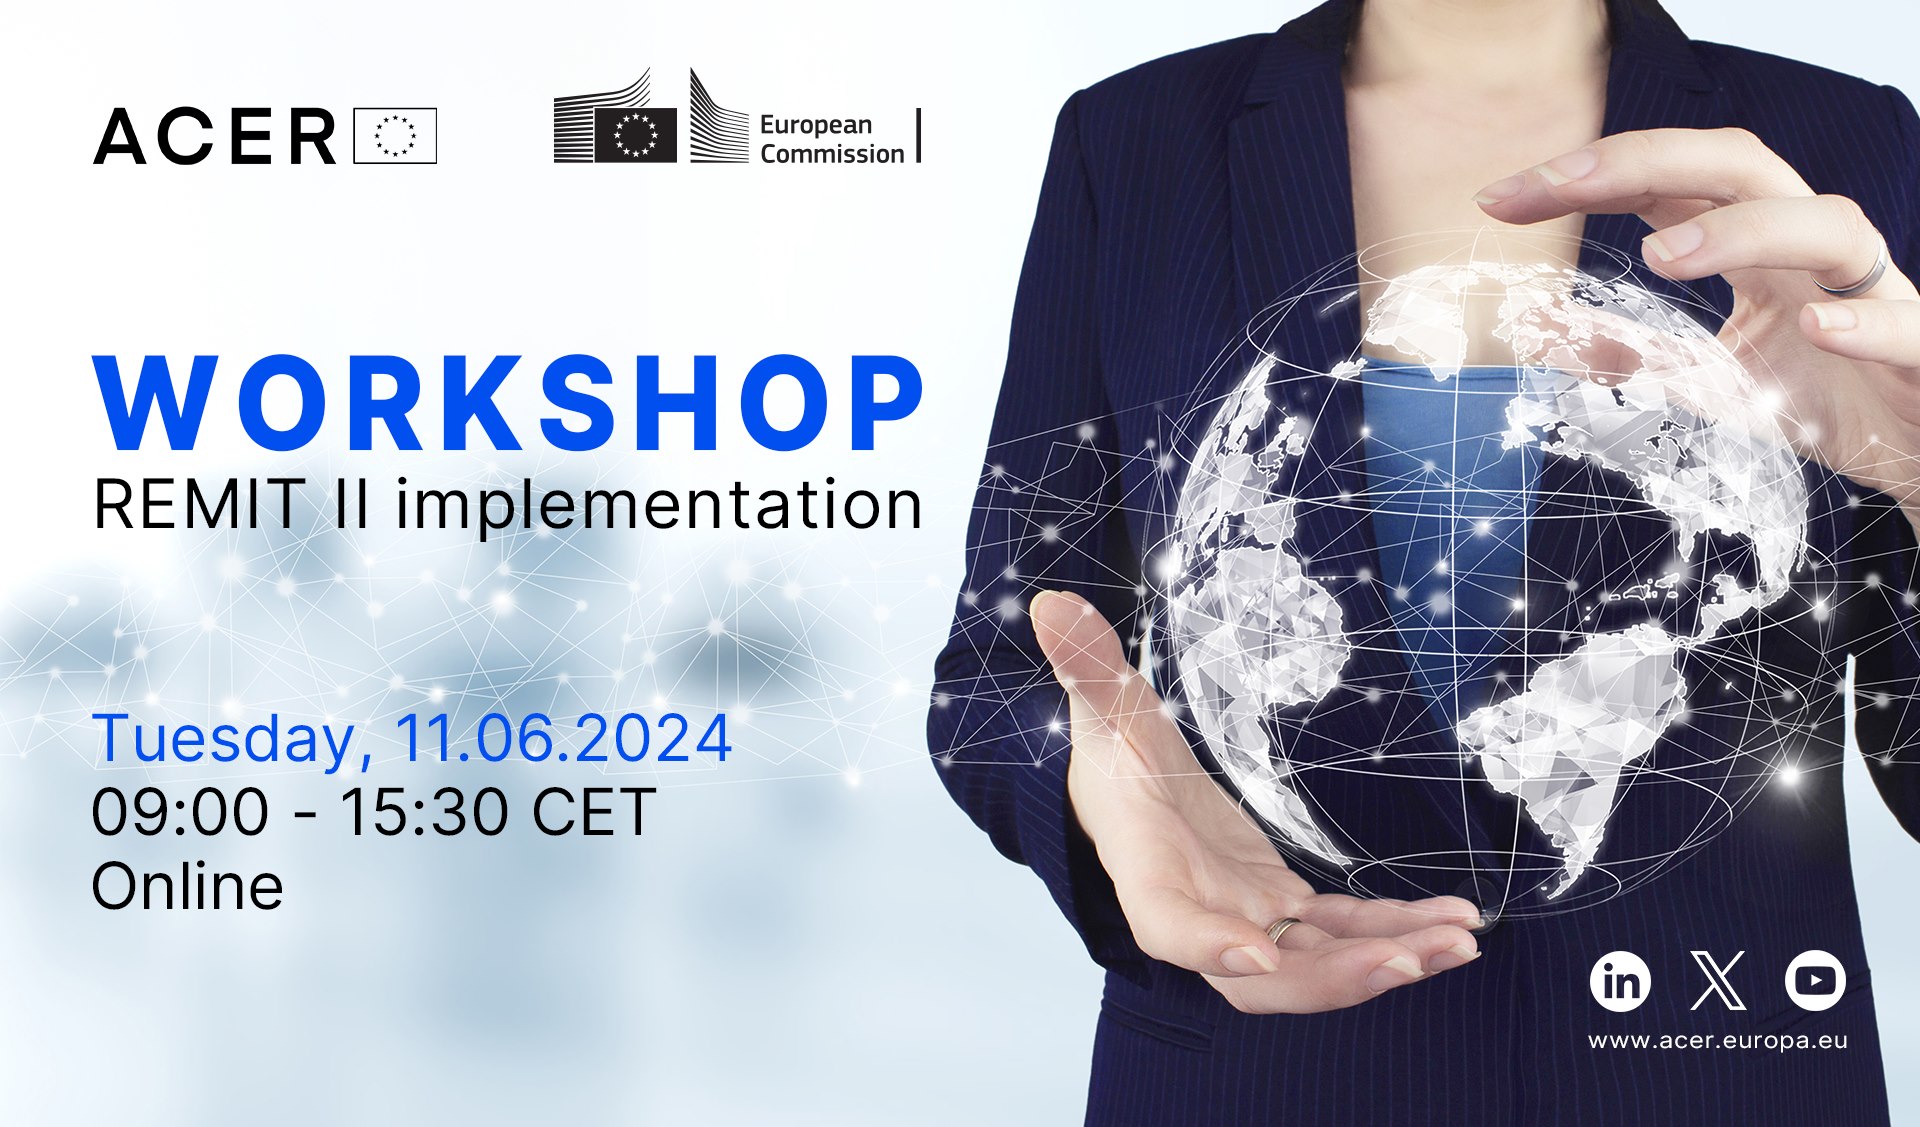 ACER and European Commission workshop: REMIT II implementation